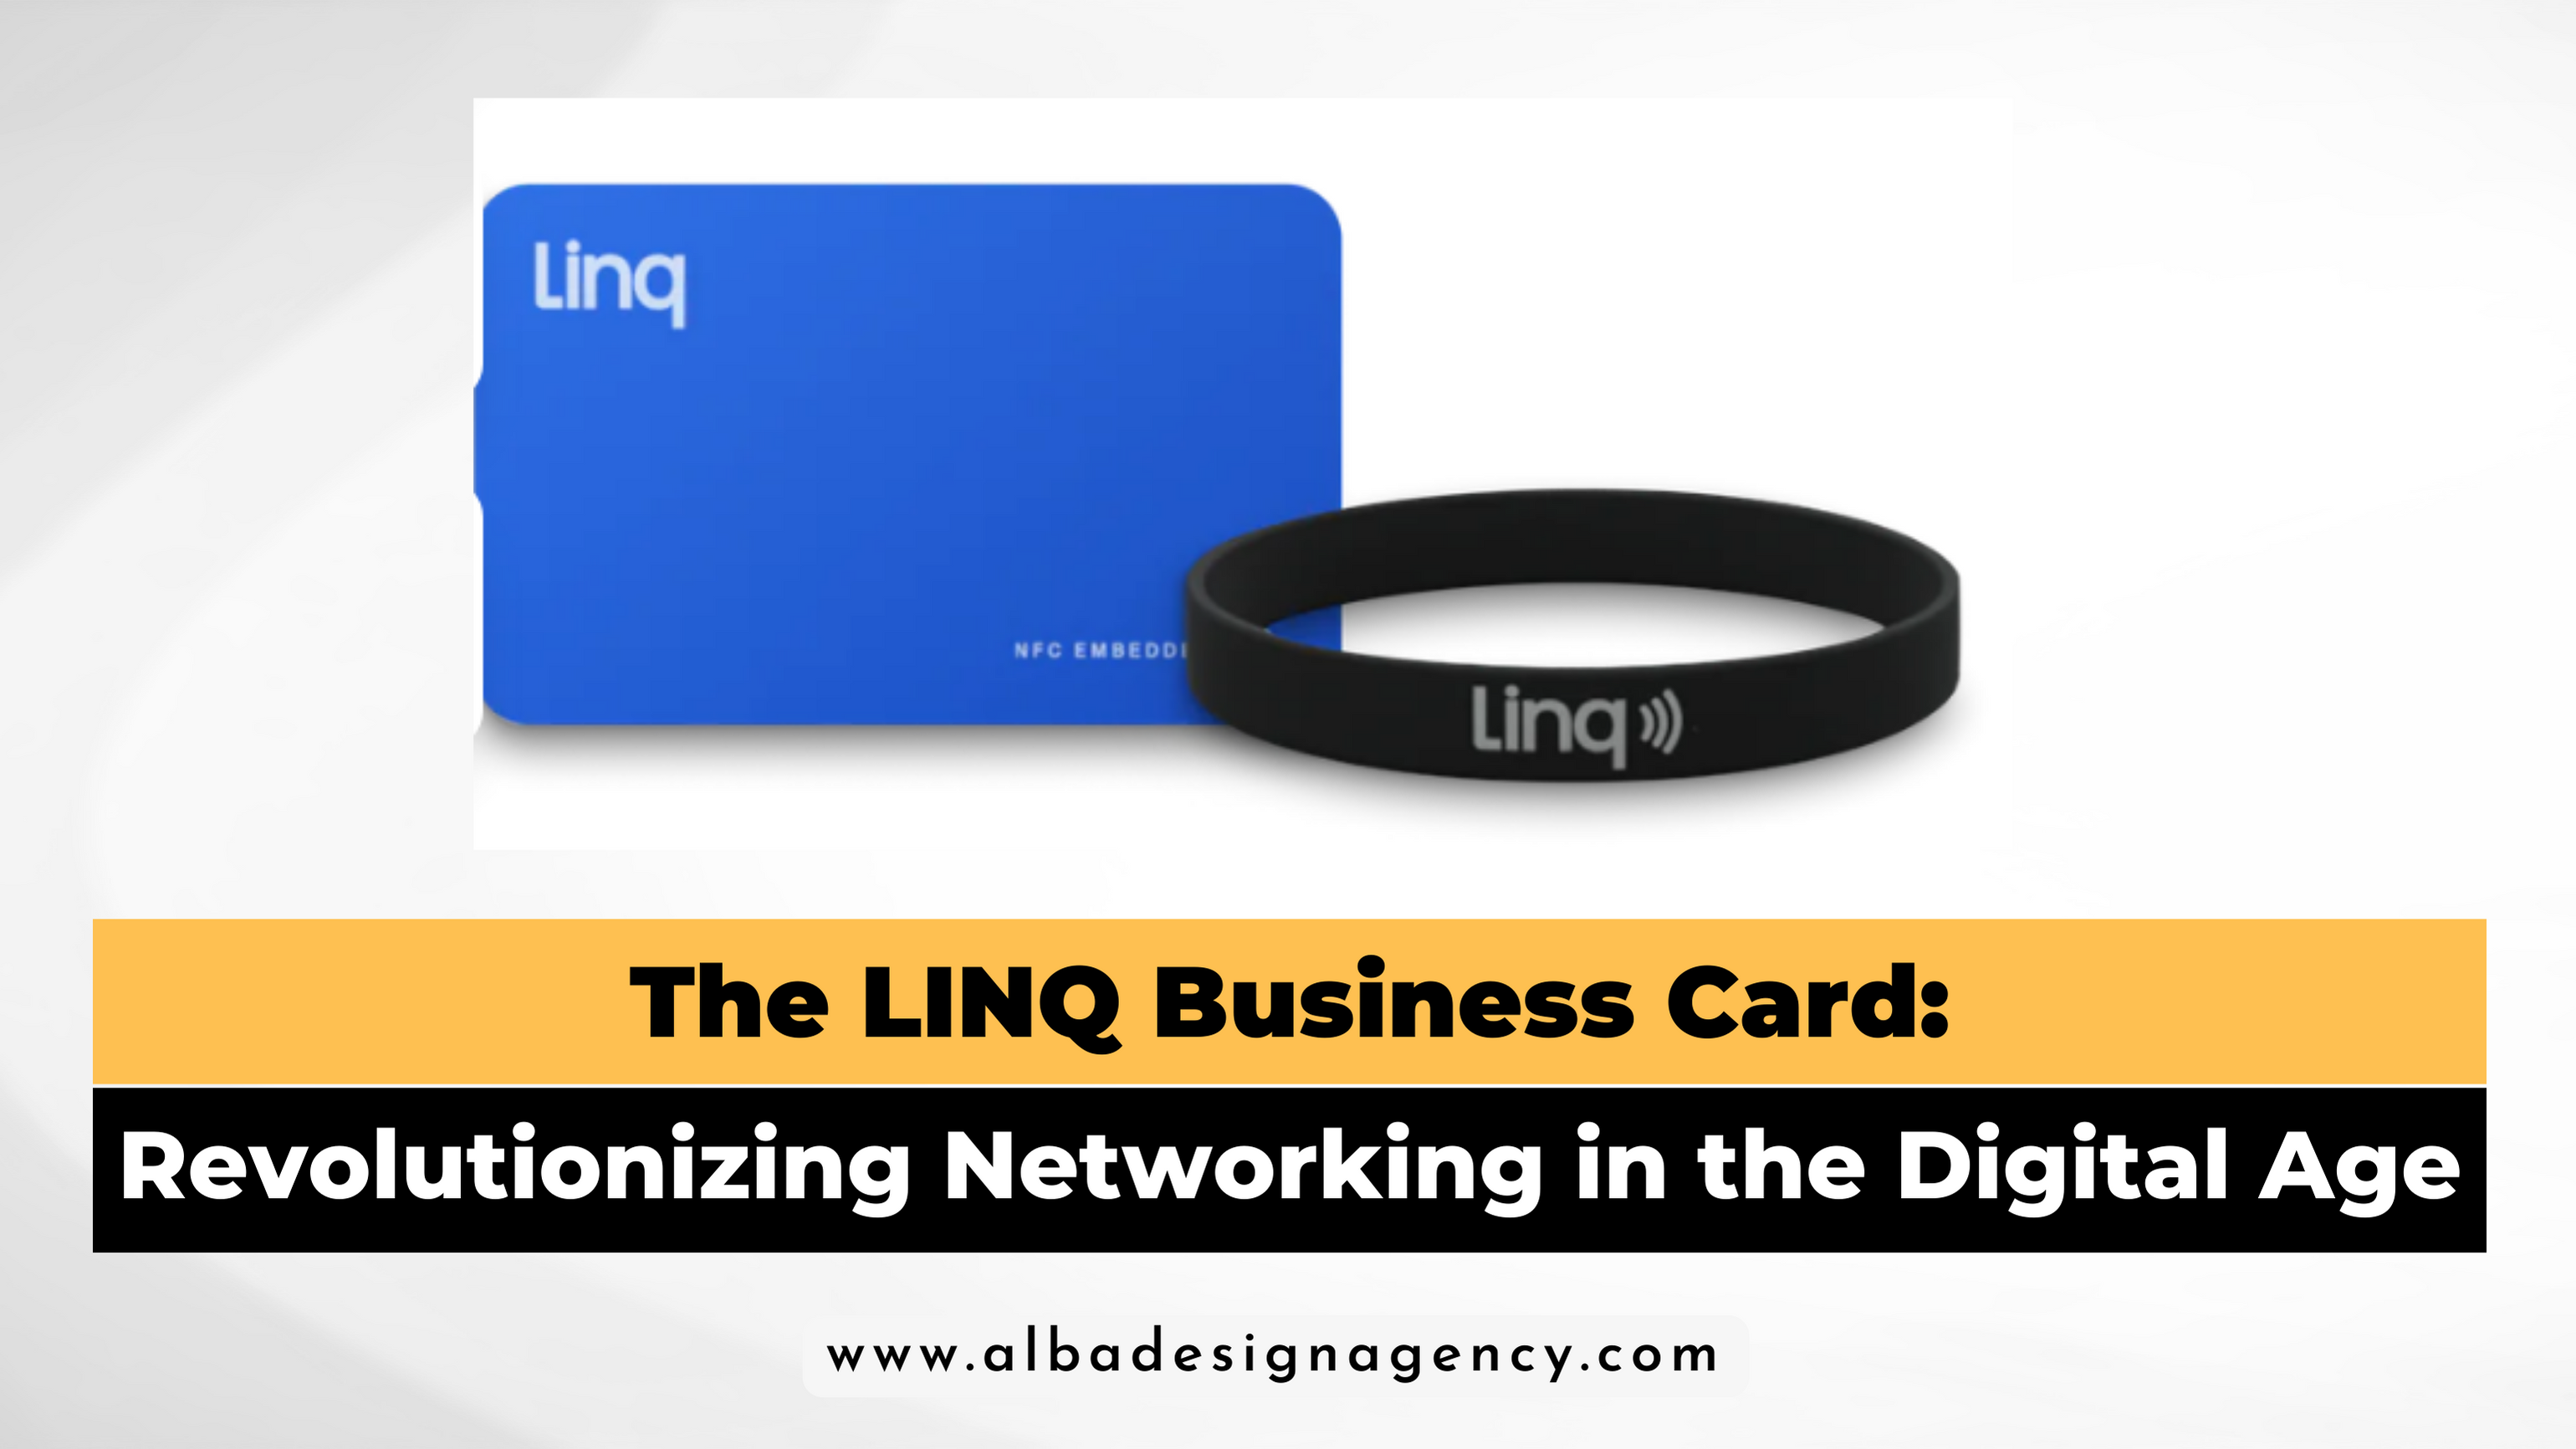 LINQ-business-card